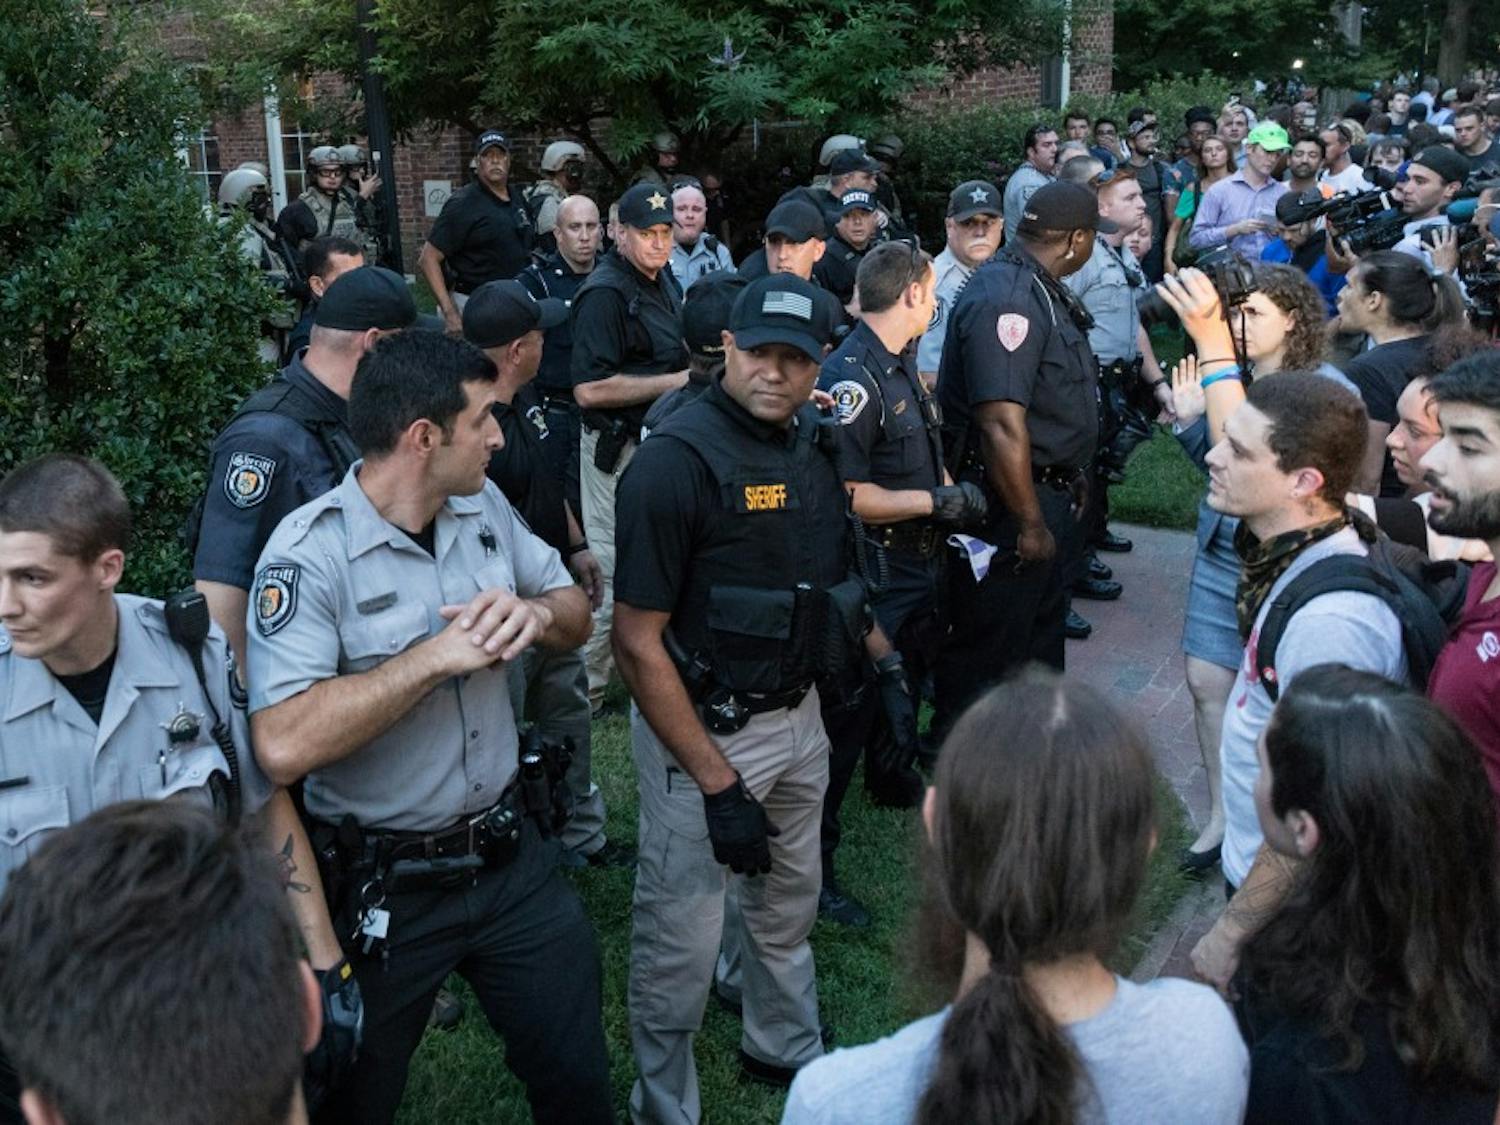 Police formed a barricade to hold off protestors around Hyde Hall after detaining a man during a protest in August.